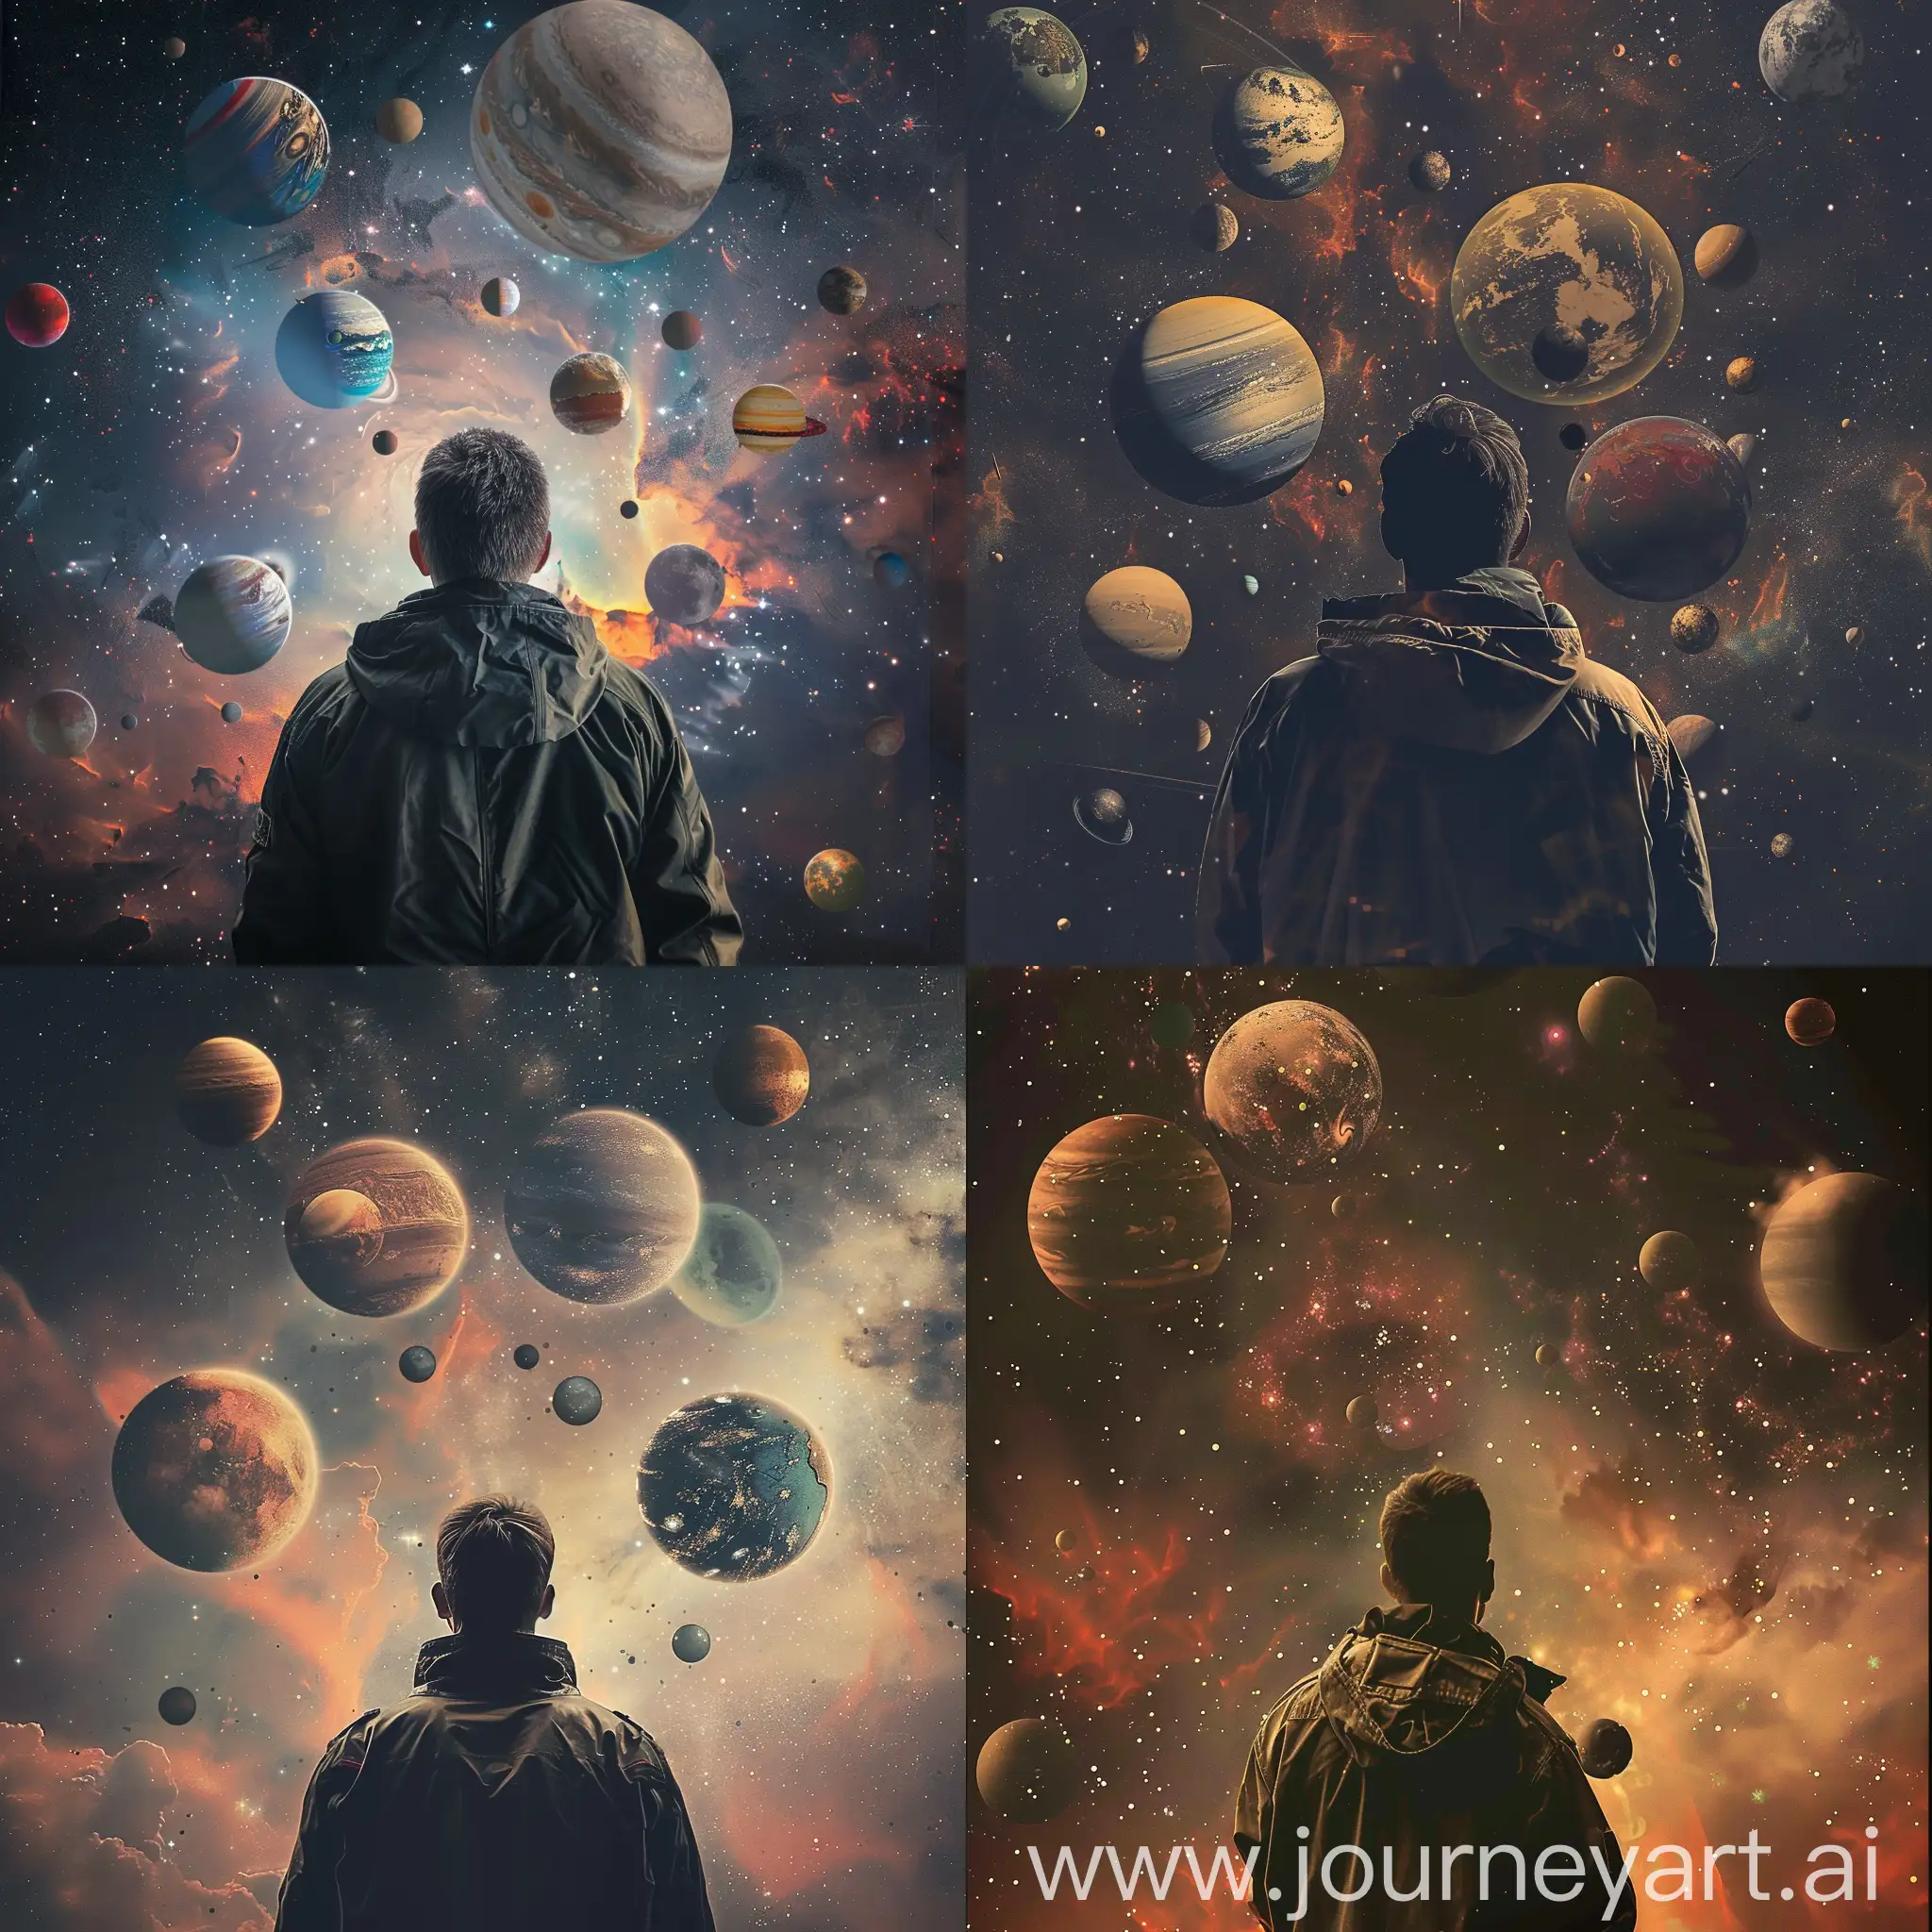 Man-in-Jacket-Amidst-Floating-Planets